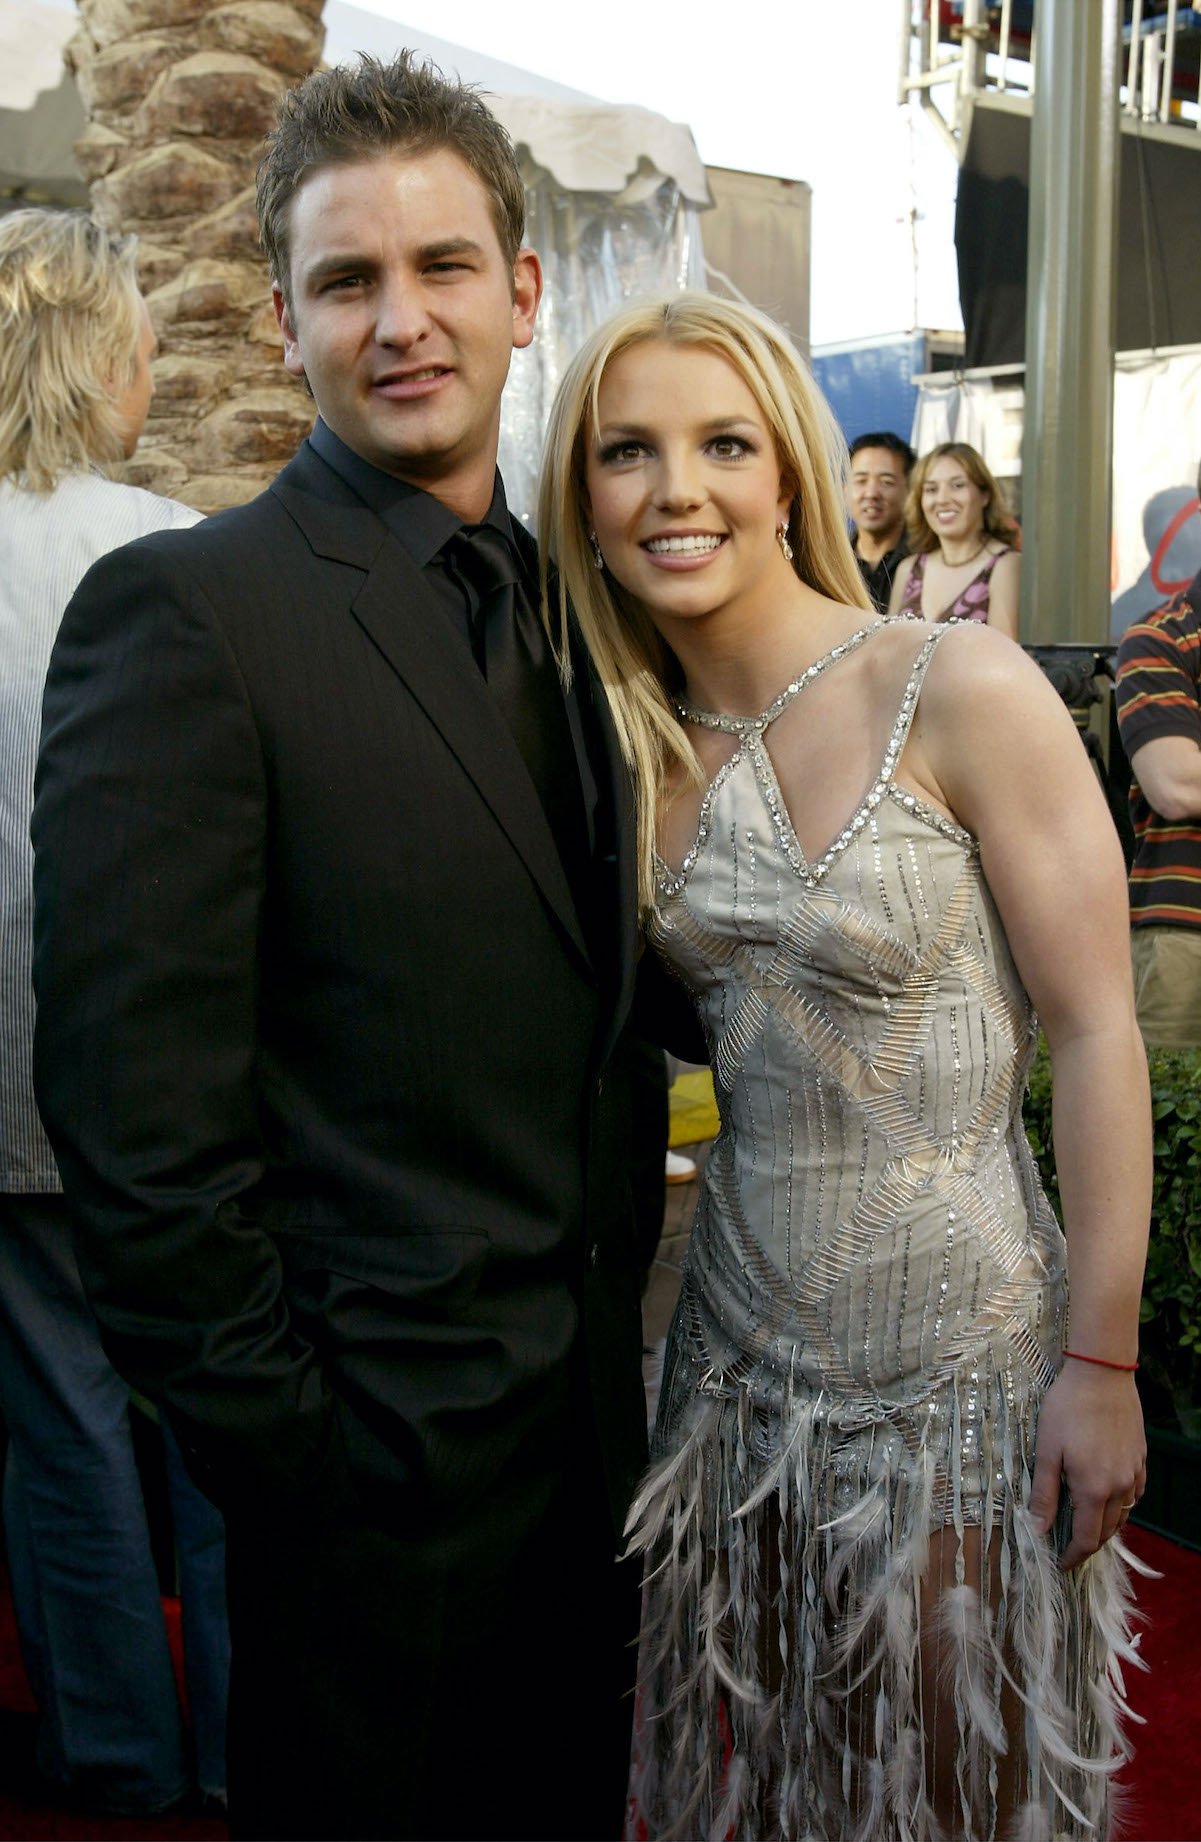 Britney Spears and her brother, Bryan Spears, attend the 31st Annual American Music Awards in 2003